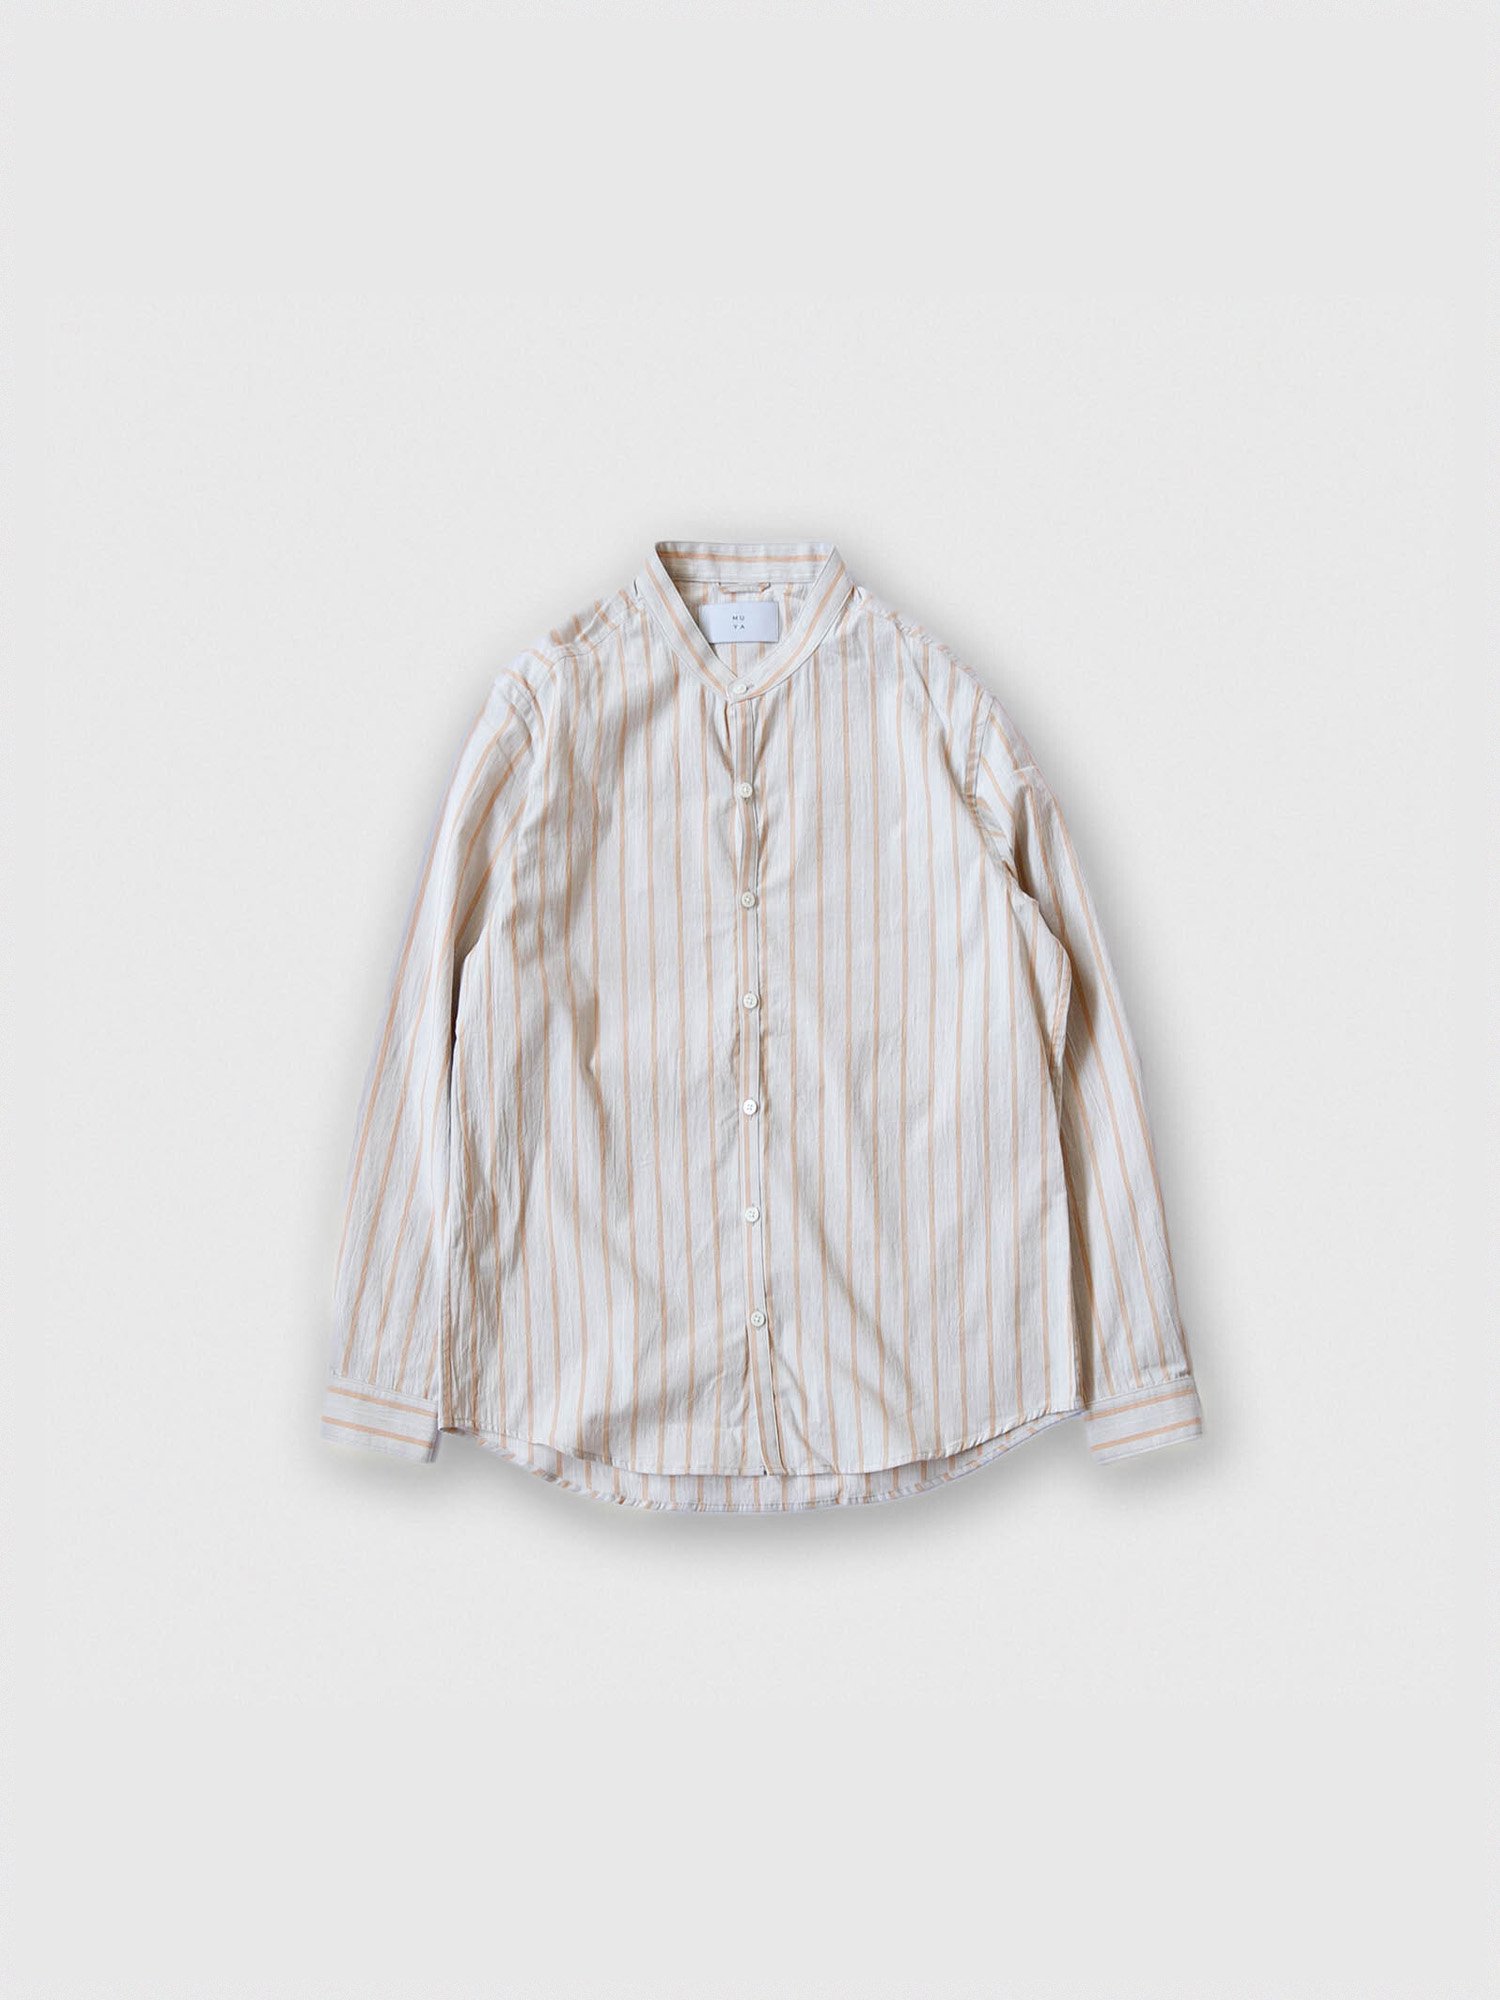 <img class='new_mark_img1' src='https://img.shop-pro.jp/img/new/icons1.gif' style='border:none;display:inline;margin:0px;padding:0px;width:auto;' />Atelier shirts relax stand collar<br />/BeigeOrange<br />/No.2501